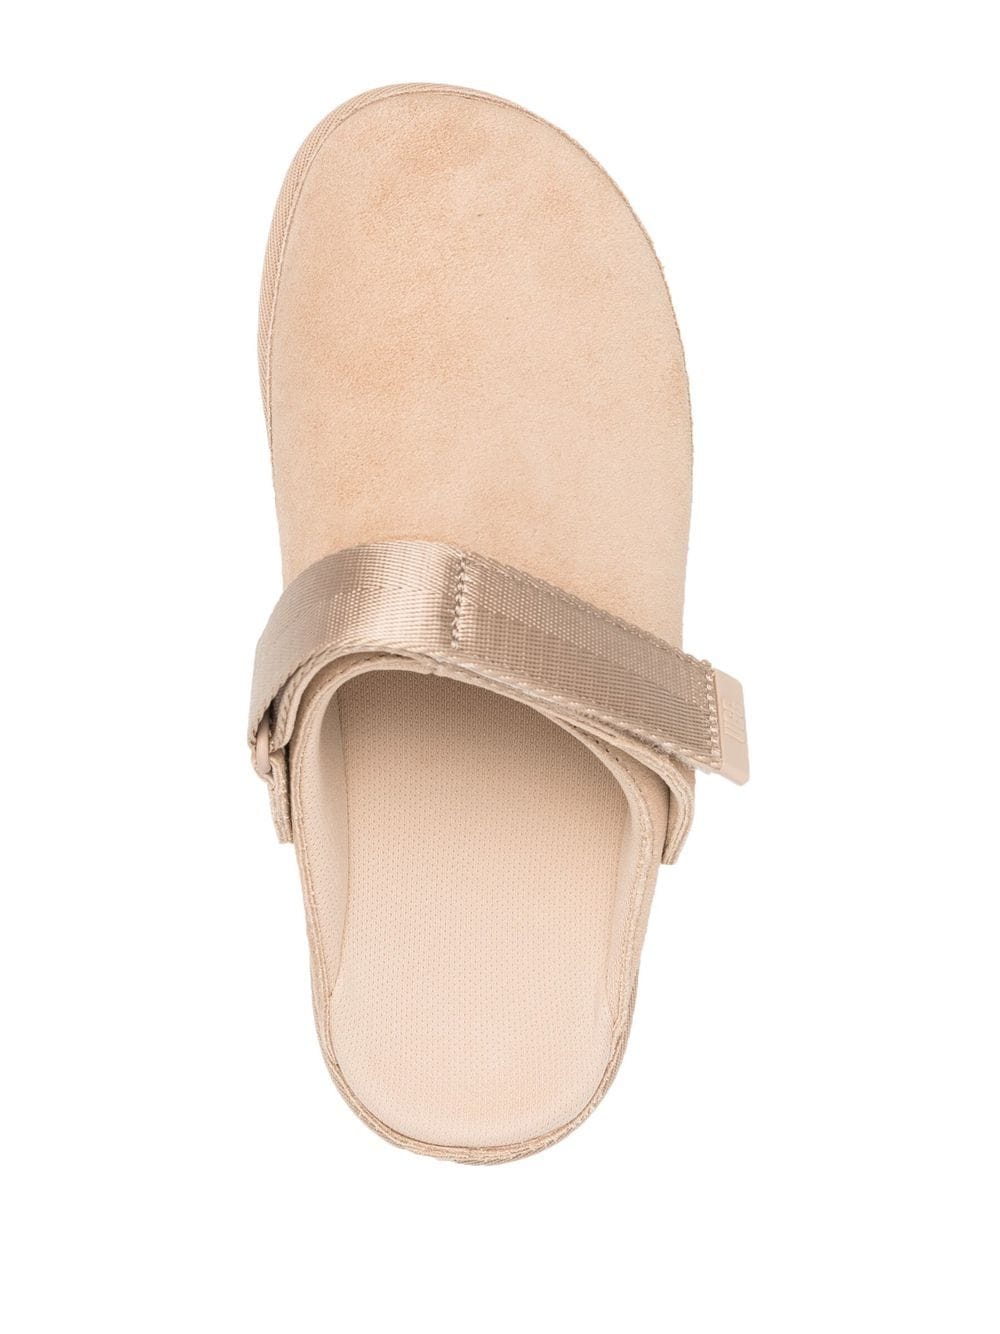 Goldenstar mules with raised sole